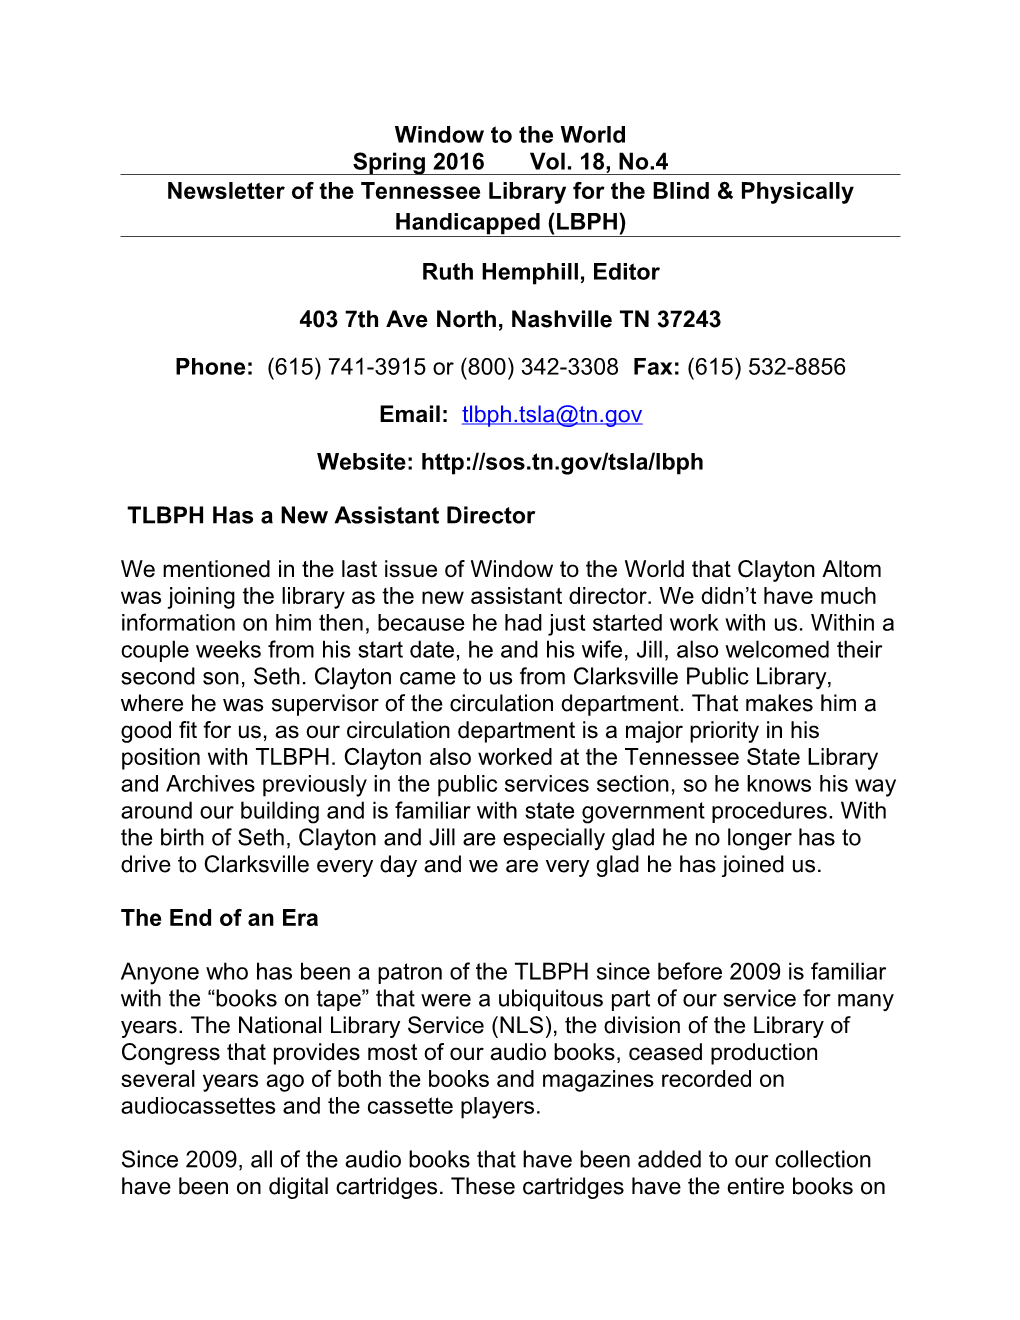 Newsletter of the Tennessee Library for the Blind & Physically Handicapped (LBPH)